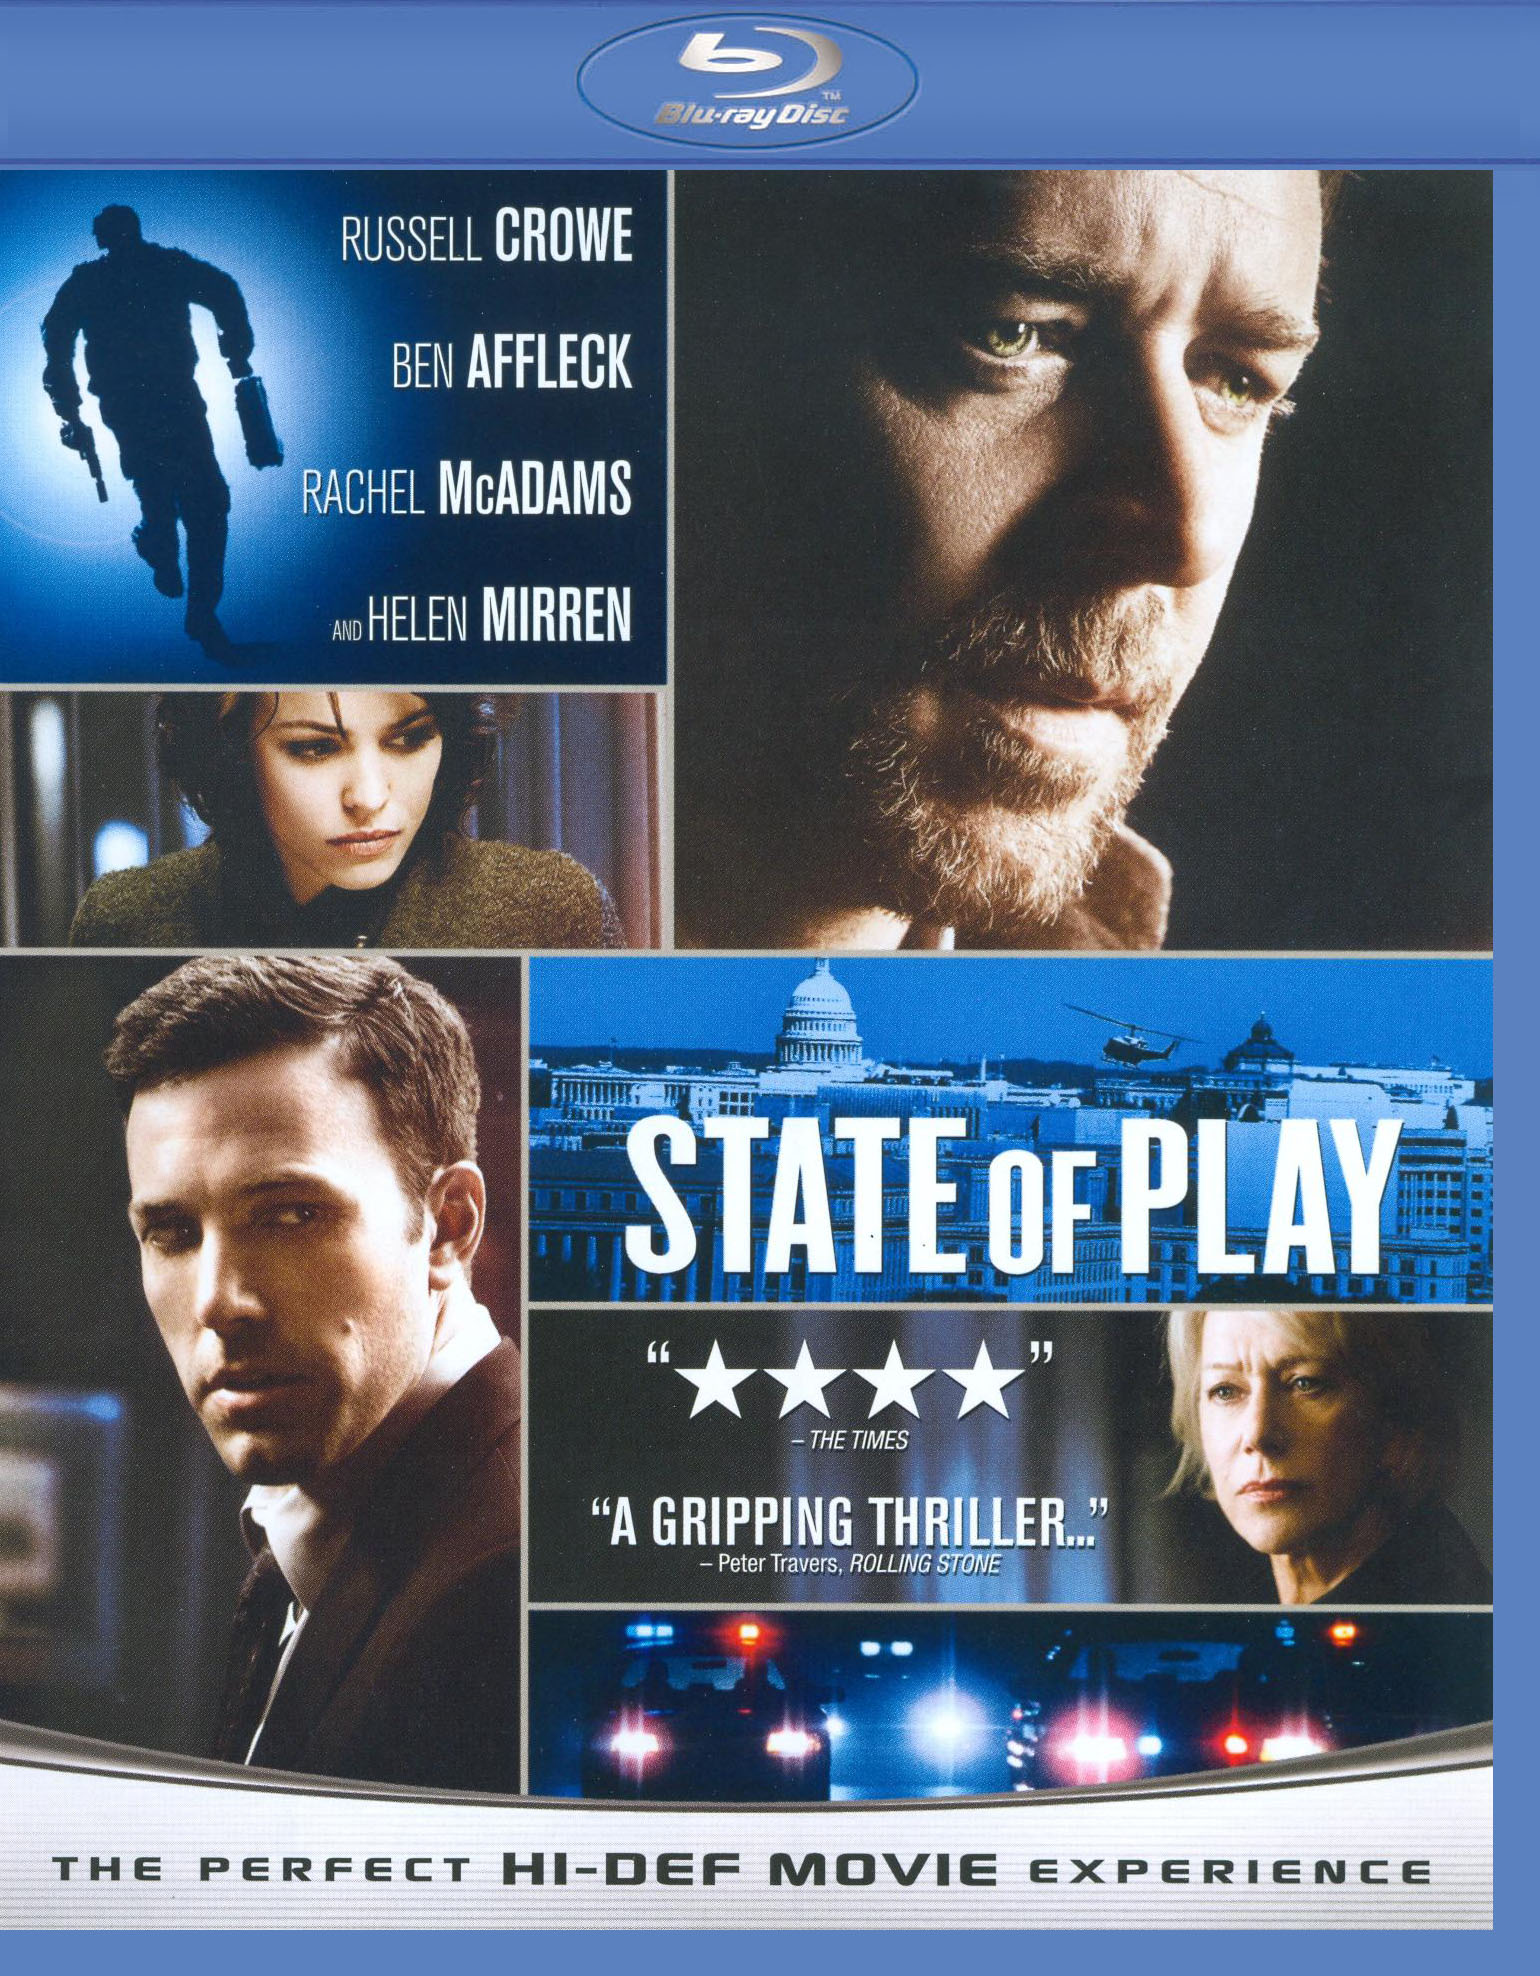 State of Play (Blu-ray Disc, 2009) 25195052993